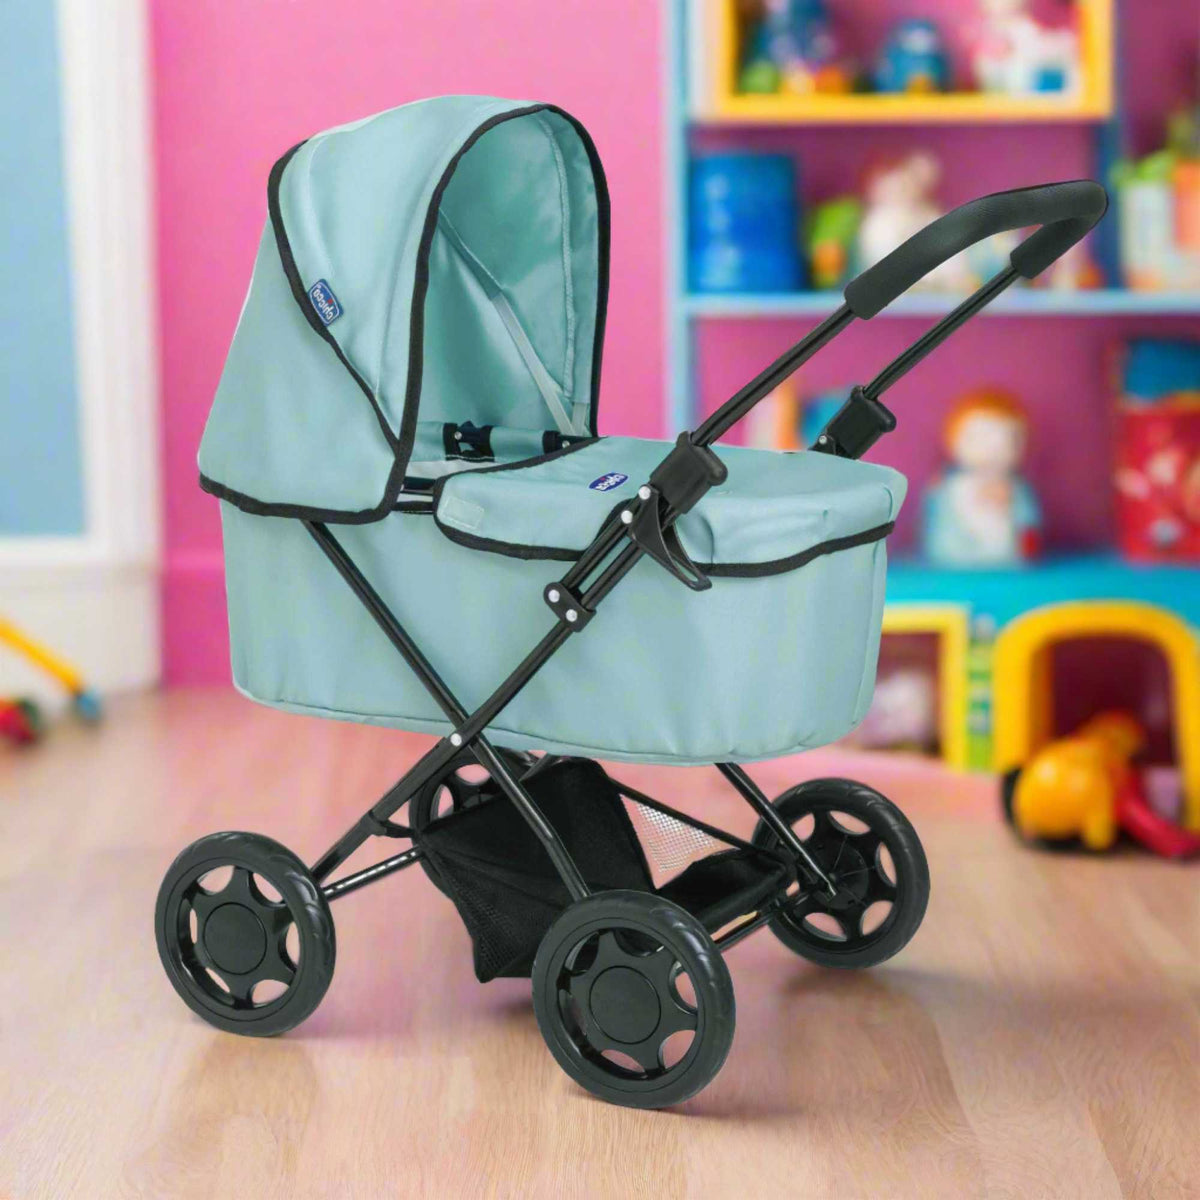 Chicco Amore Dolls Pram - Elegant and Sturdy Toy Pram for Dolls with Adjustable Handle